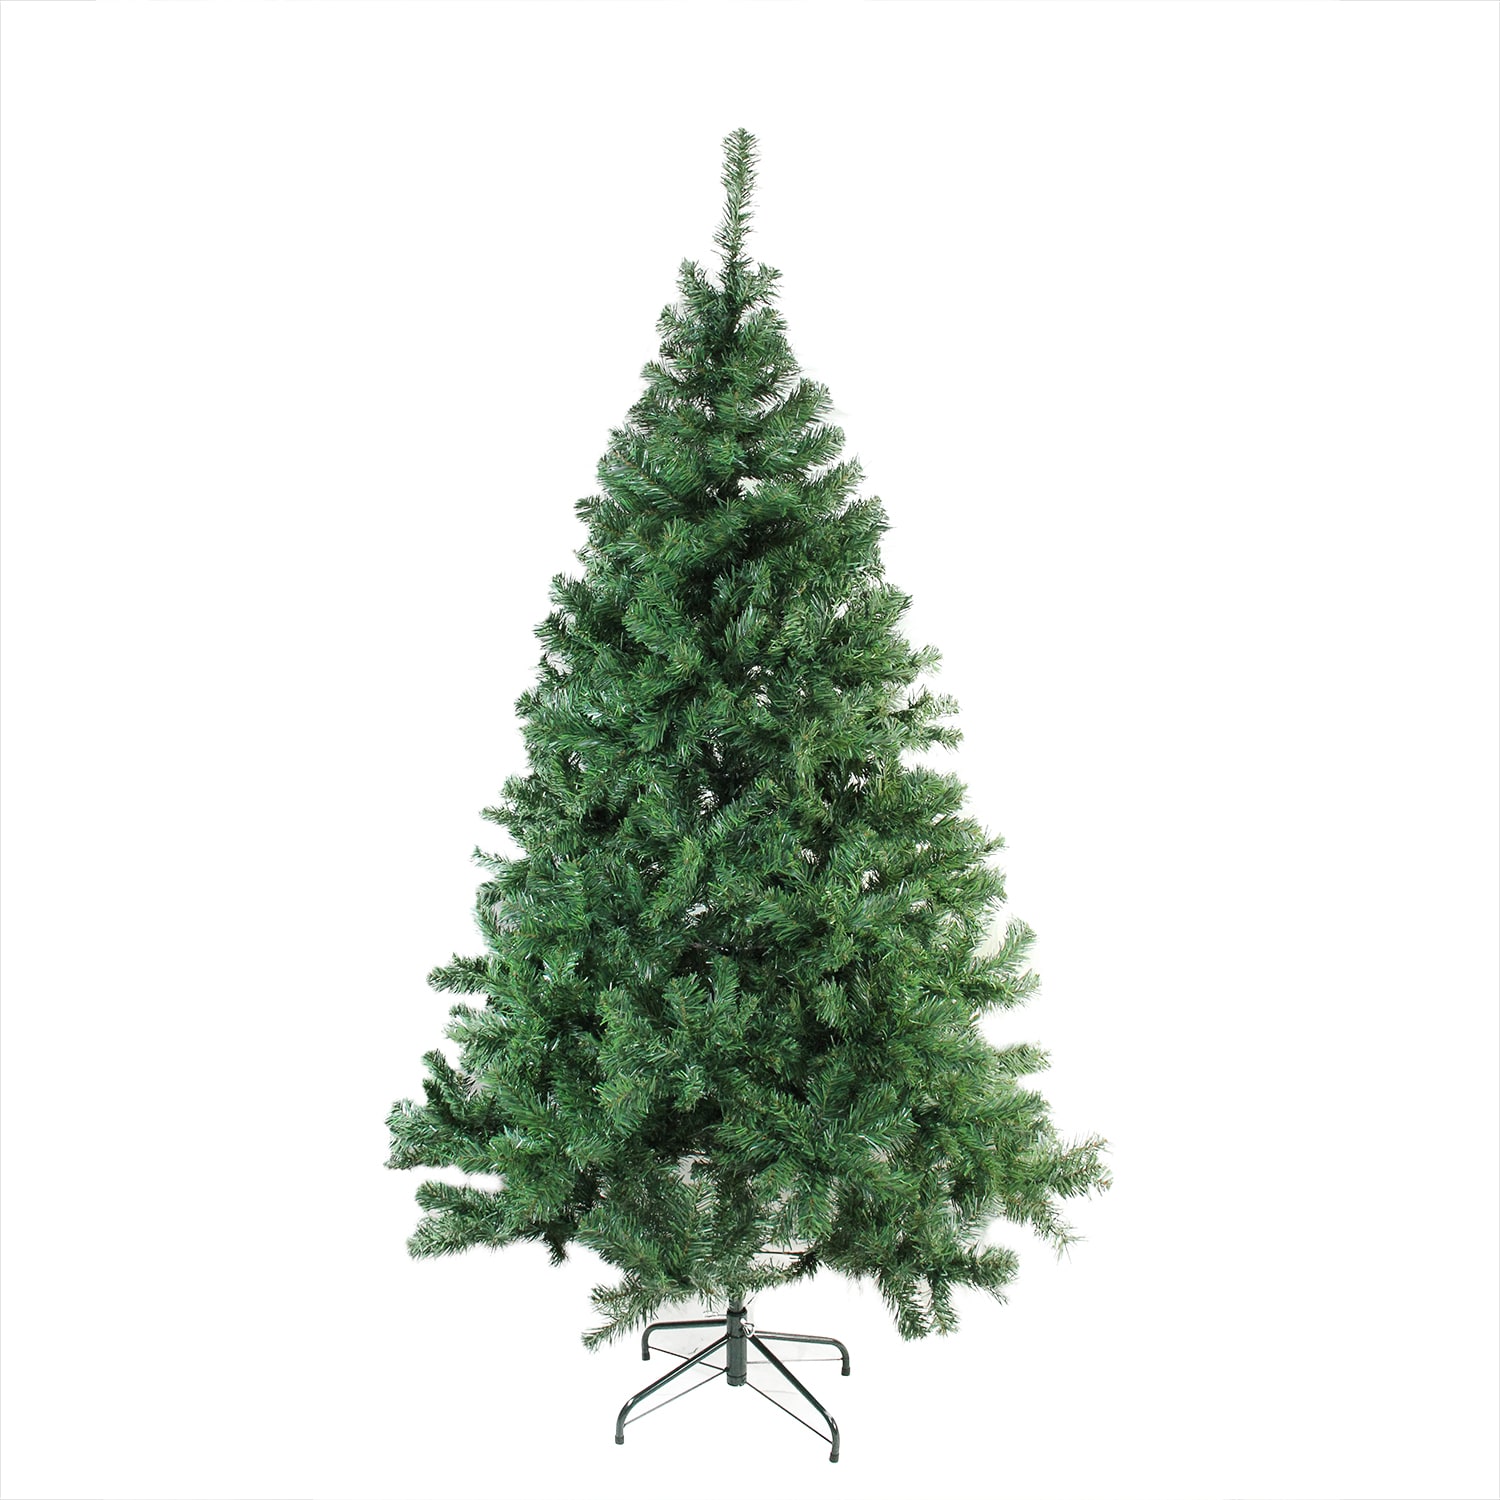 Northlight 9' x 10 Pre-lit White Mixed Pine Artificial Christmas